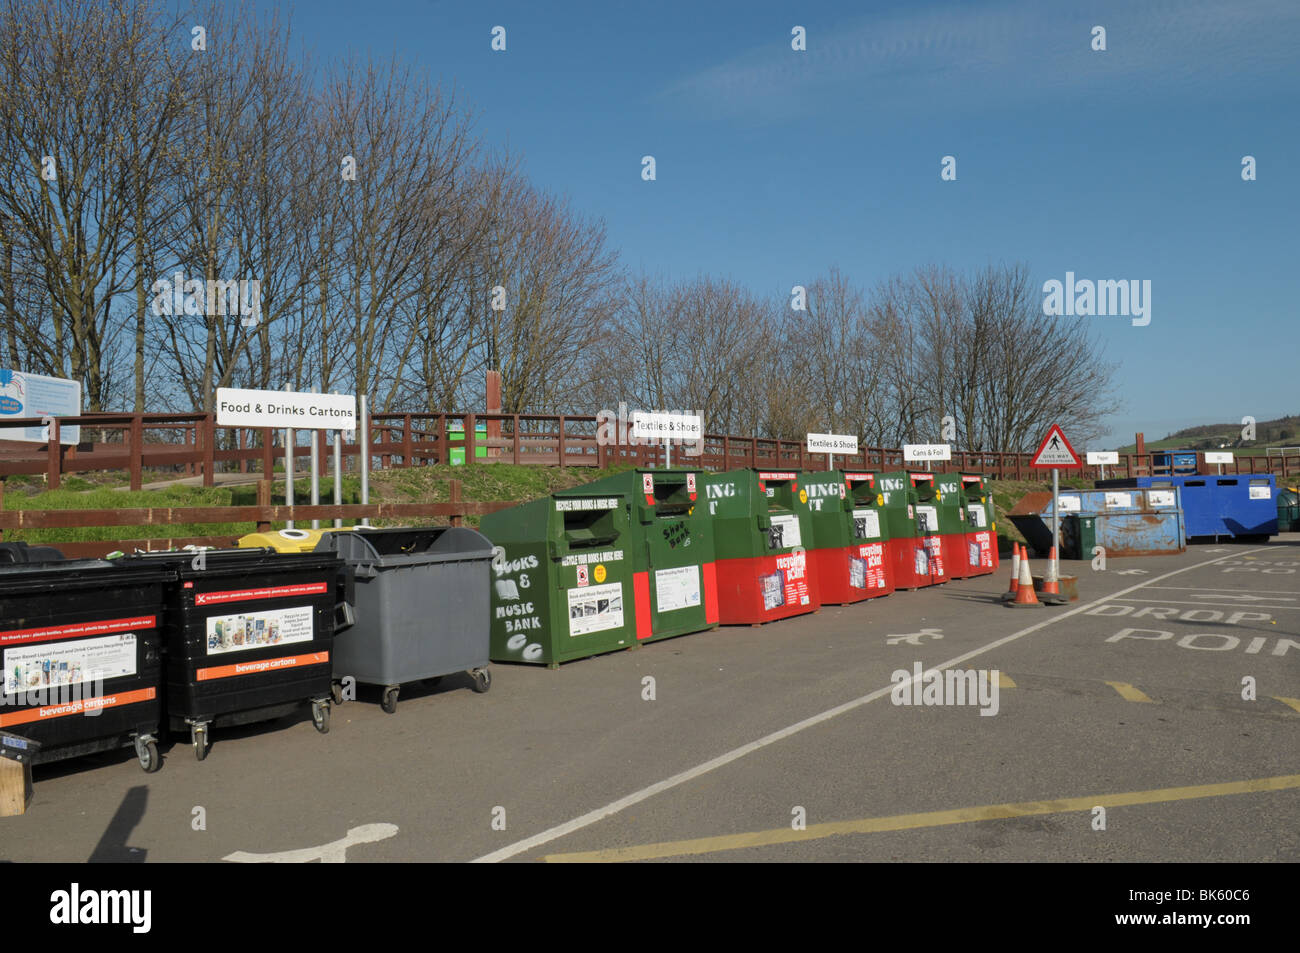 A bank of recycling bins at a recycling centre Stock Photo - Alamy